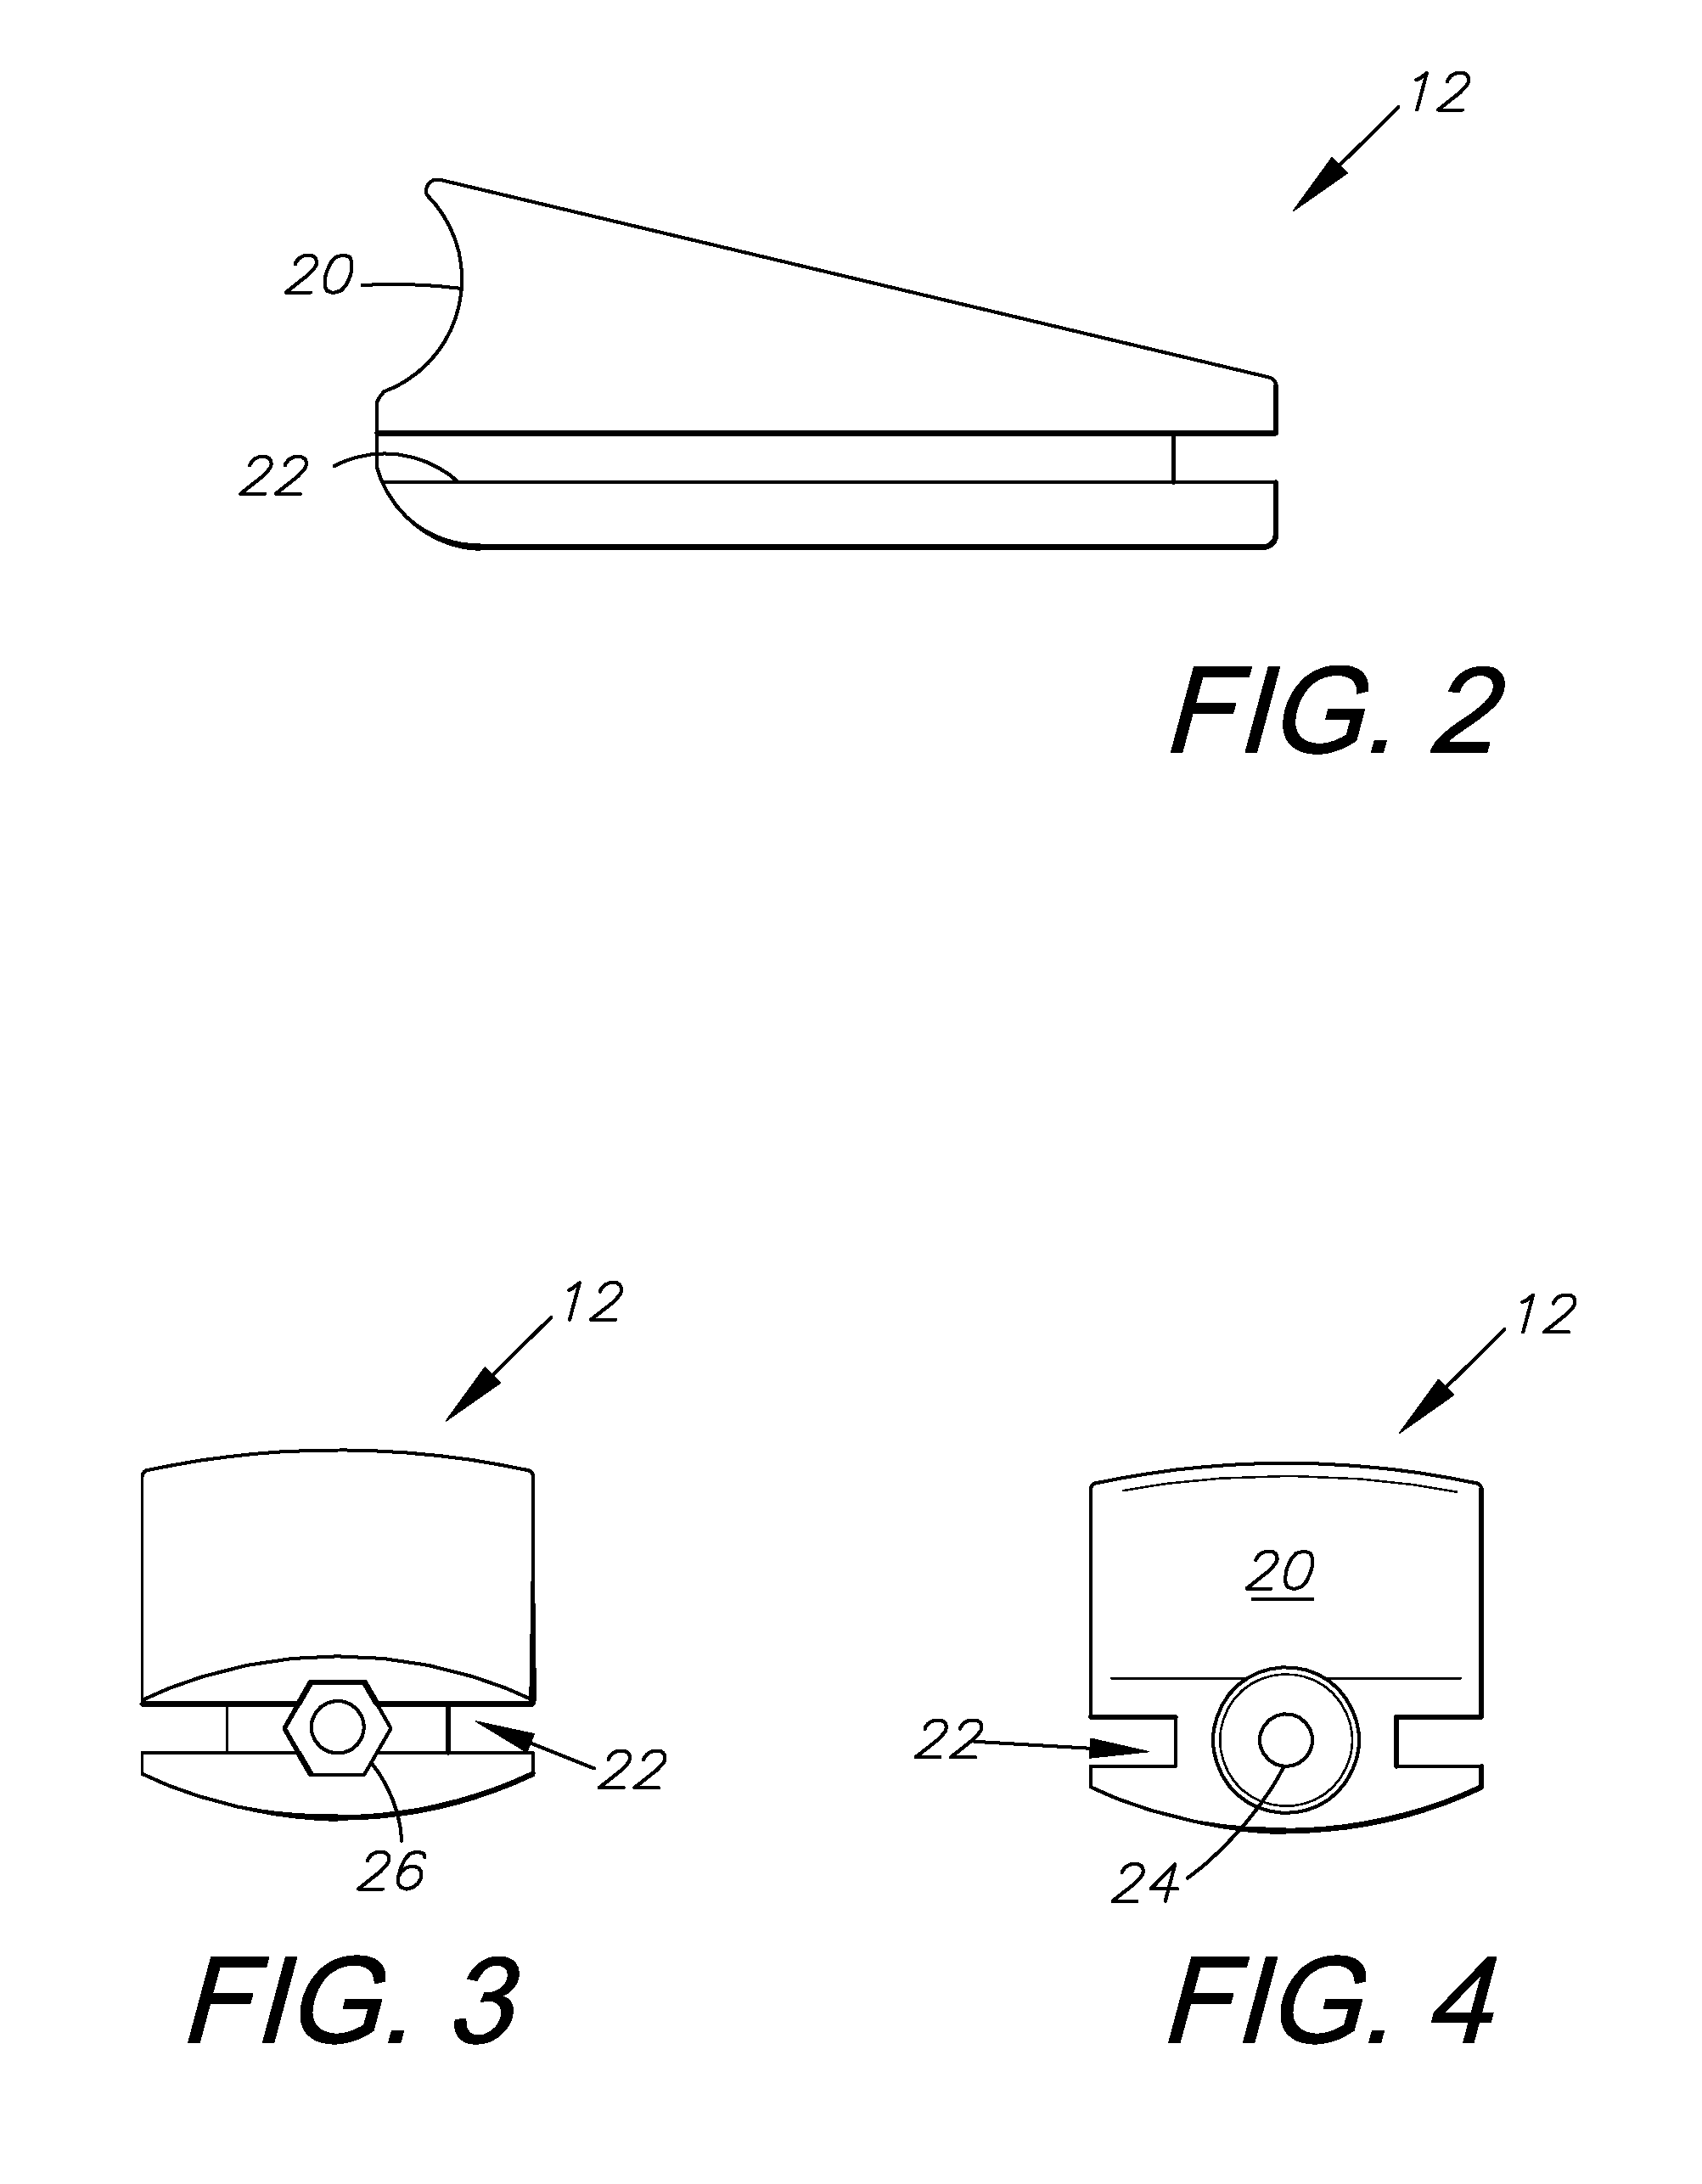 Apparatus and method to mount steering actuator